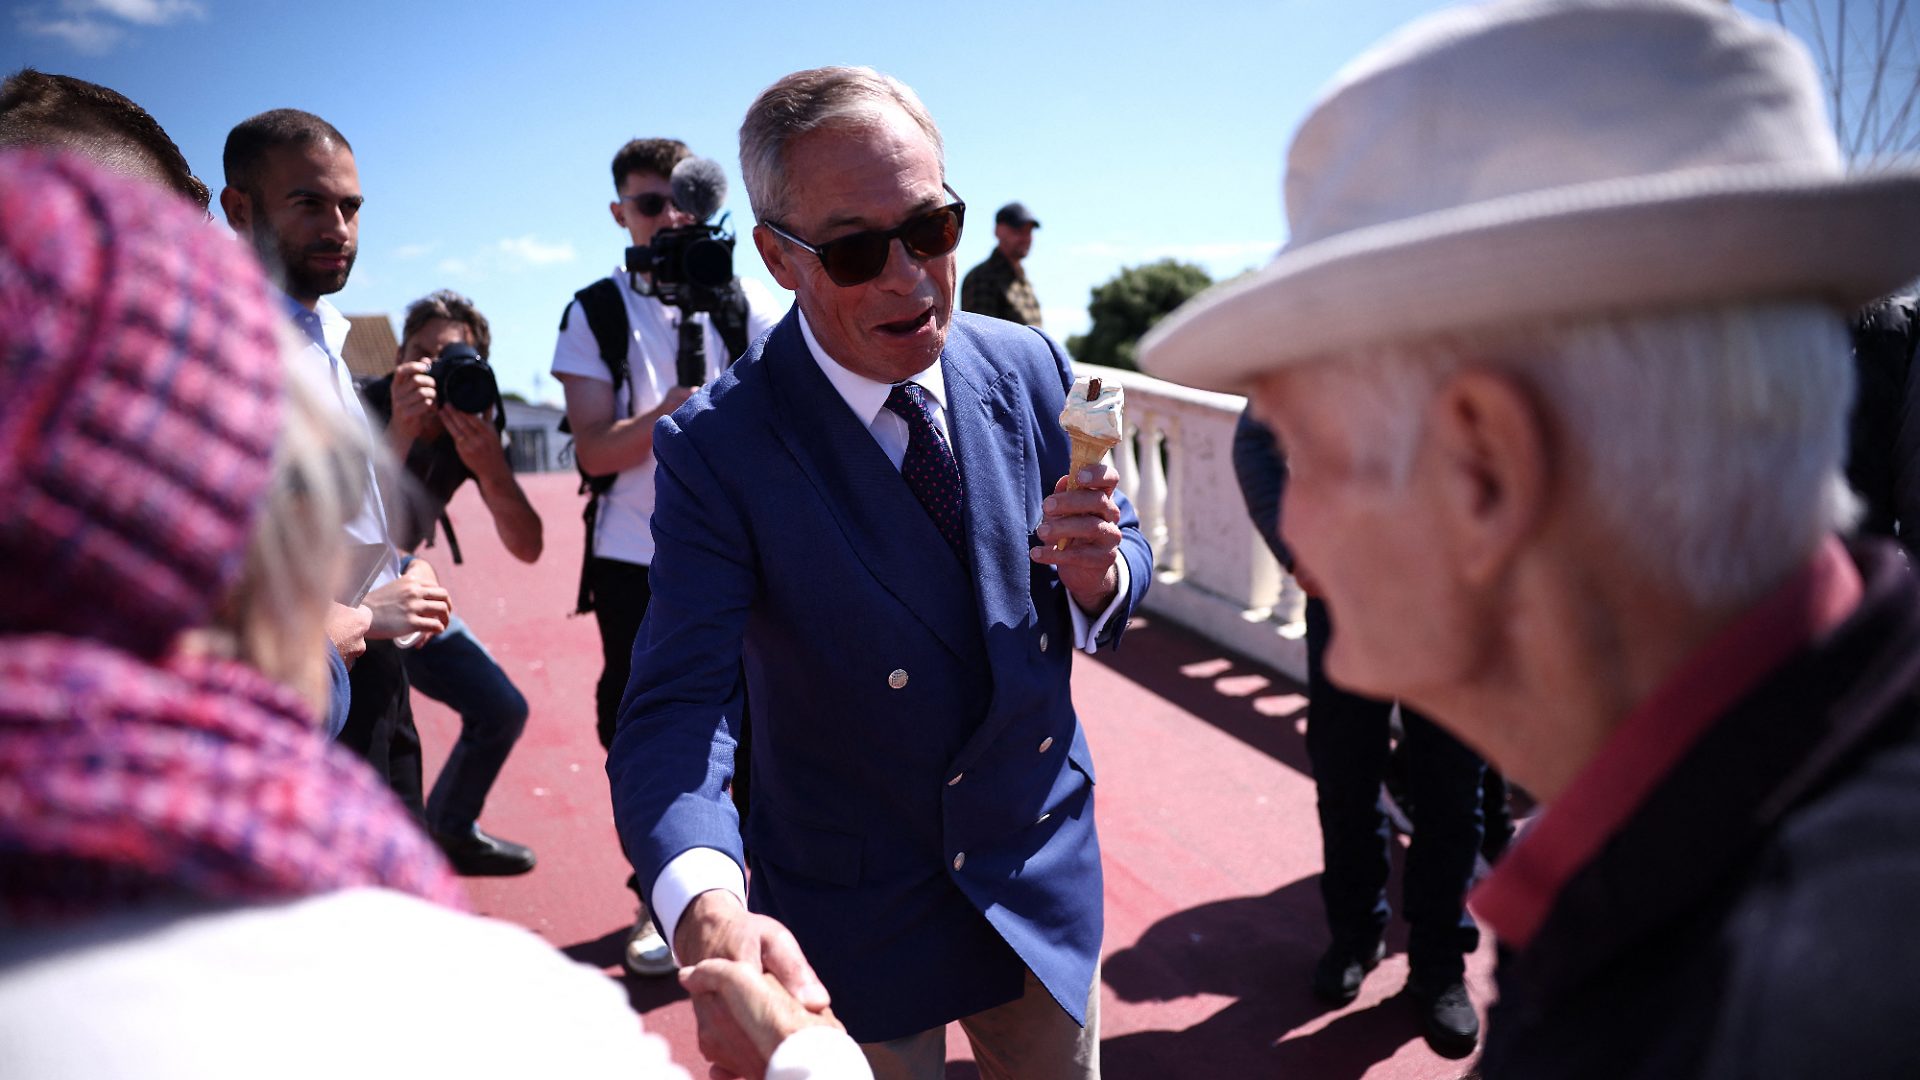 Reform UK leader Nigel Farage meets residents in Clacton-on-Sea on July 4, 2024 as Britain goes to the polls. Photo: Henry Nicholls/AFP/Getty